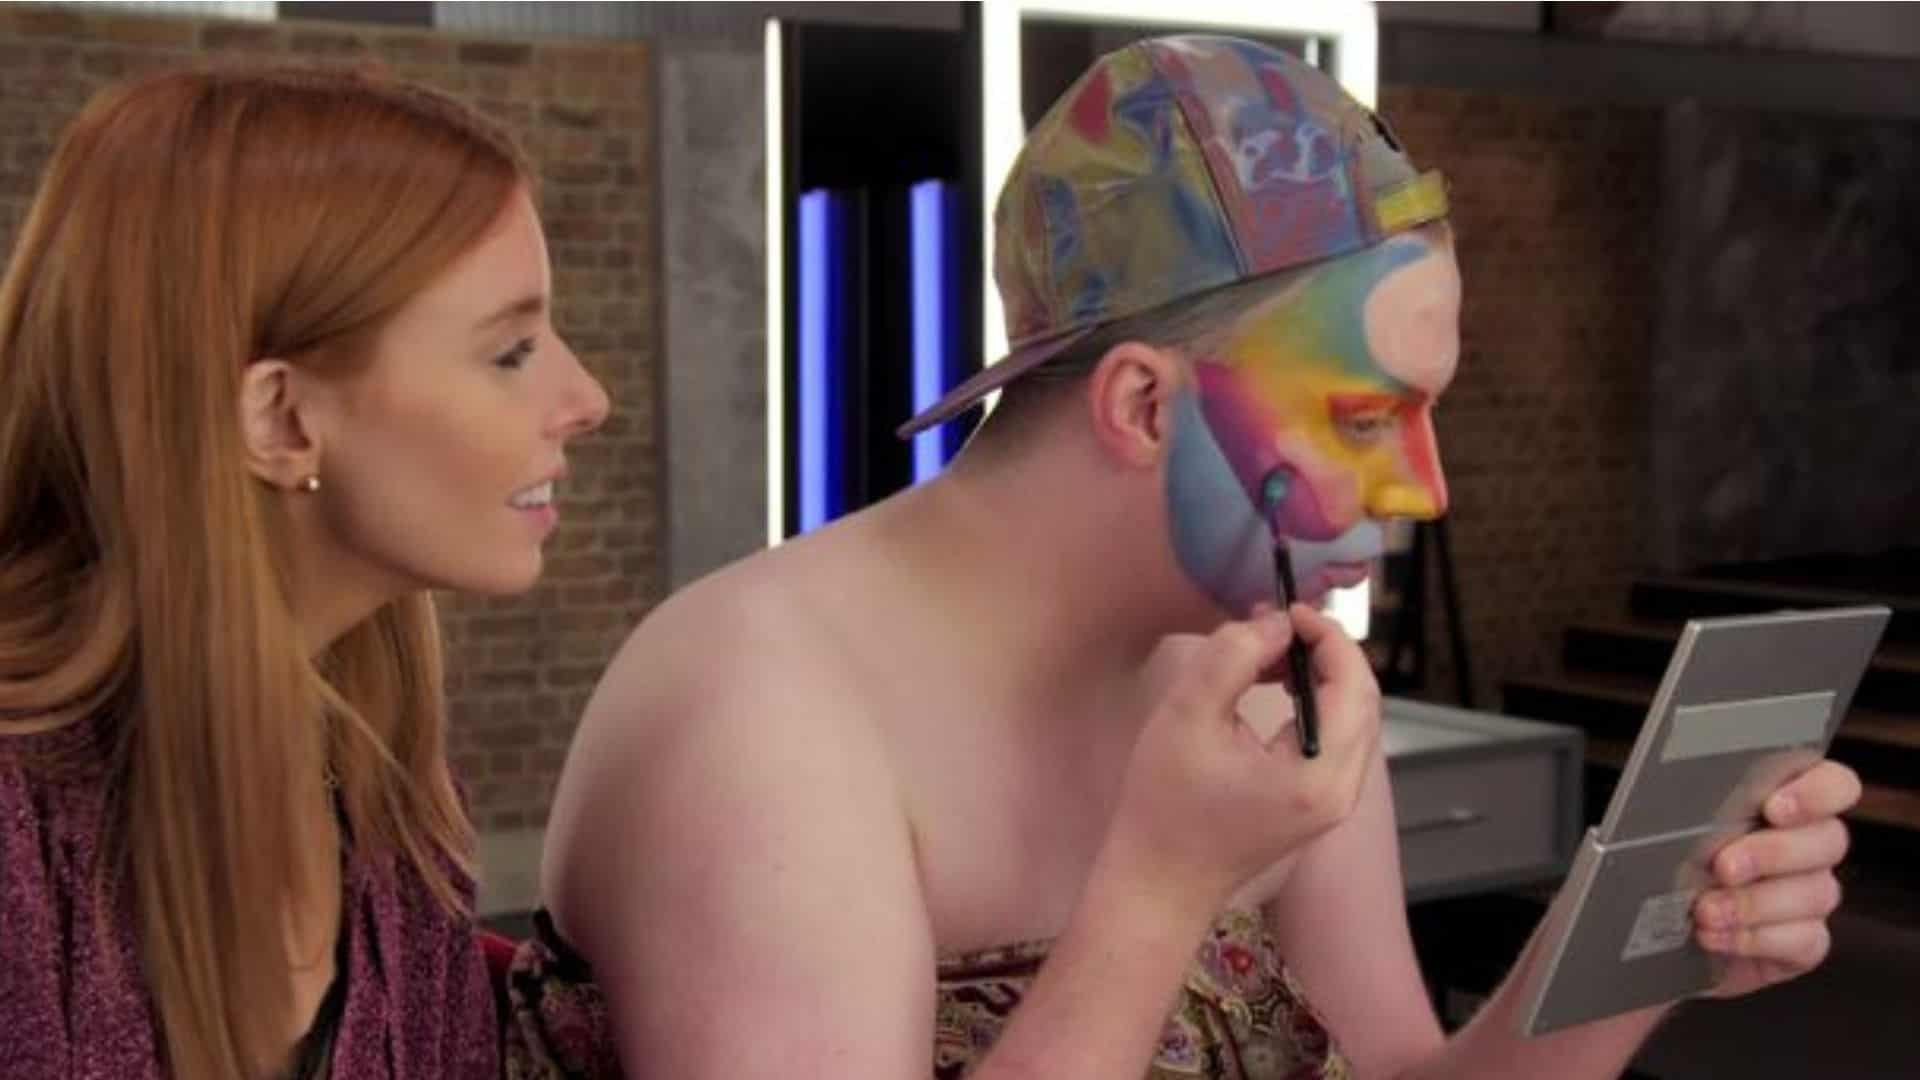 Stacey Dooley watches Ellis Atlantis do their makeup in this image from BBC Three